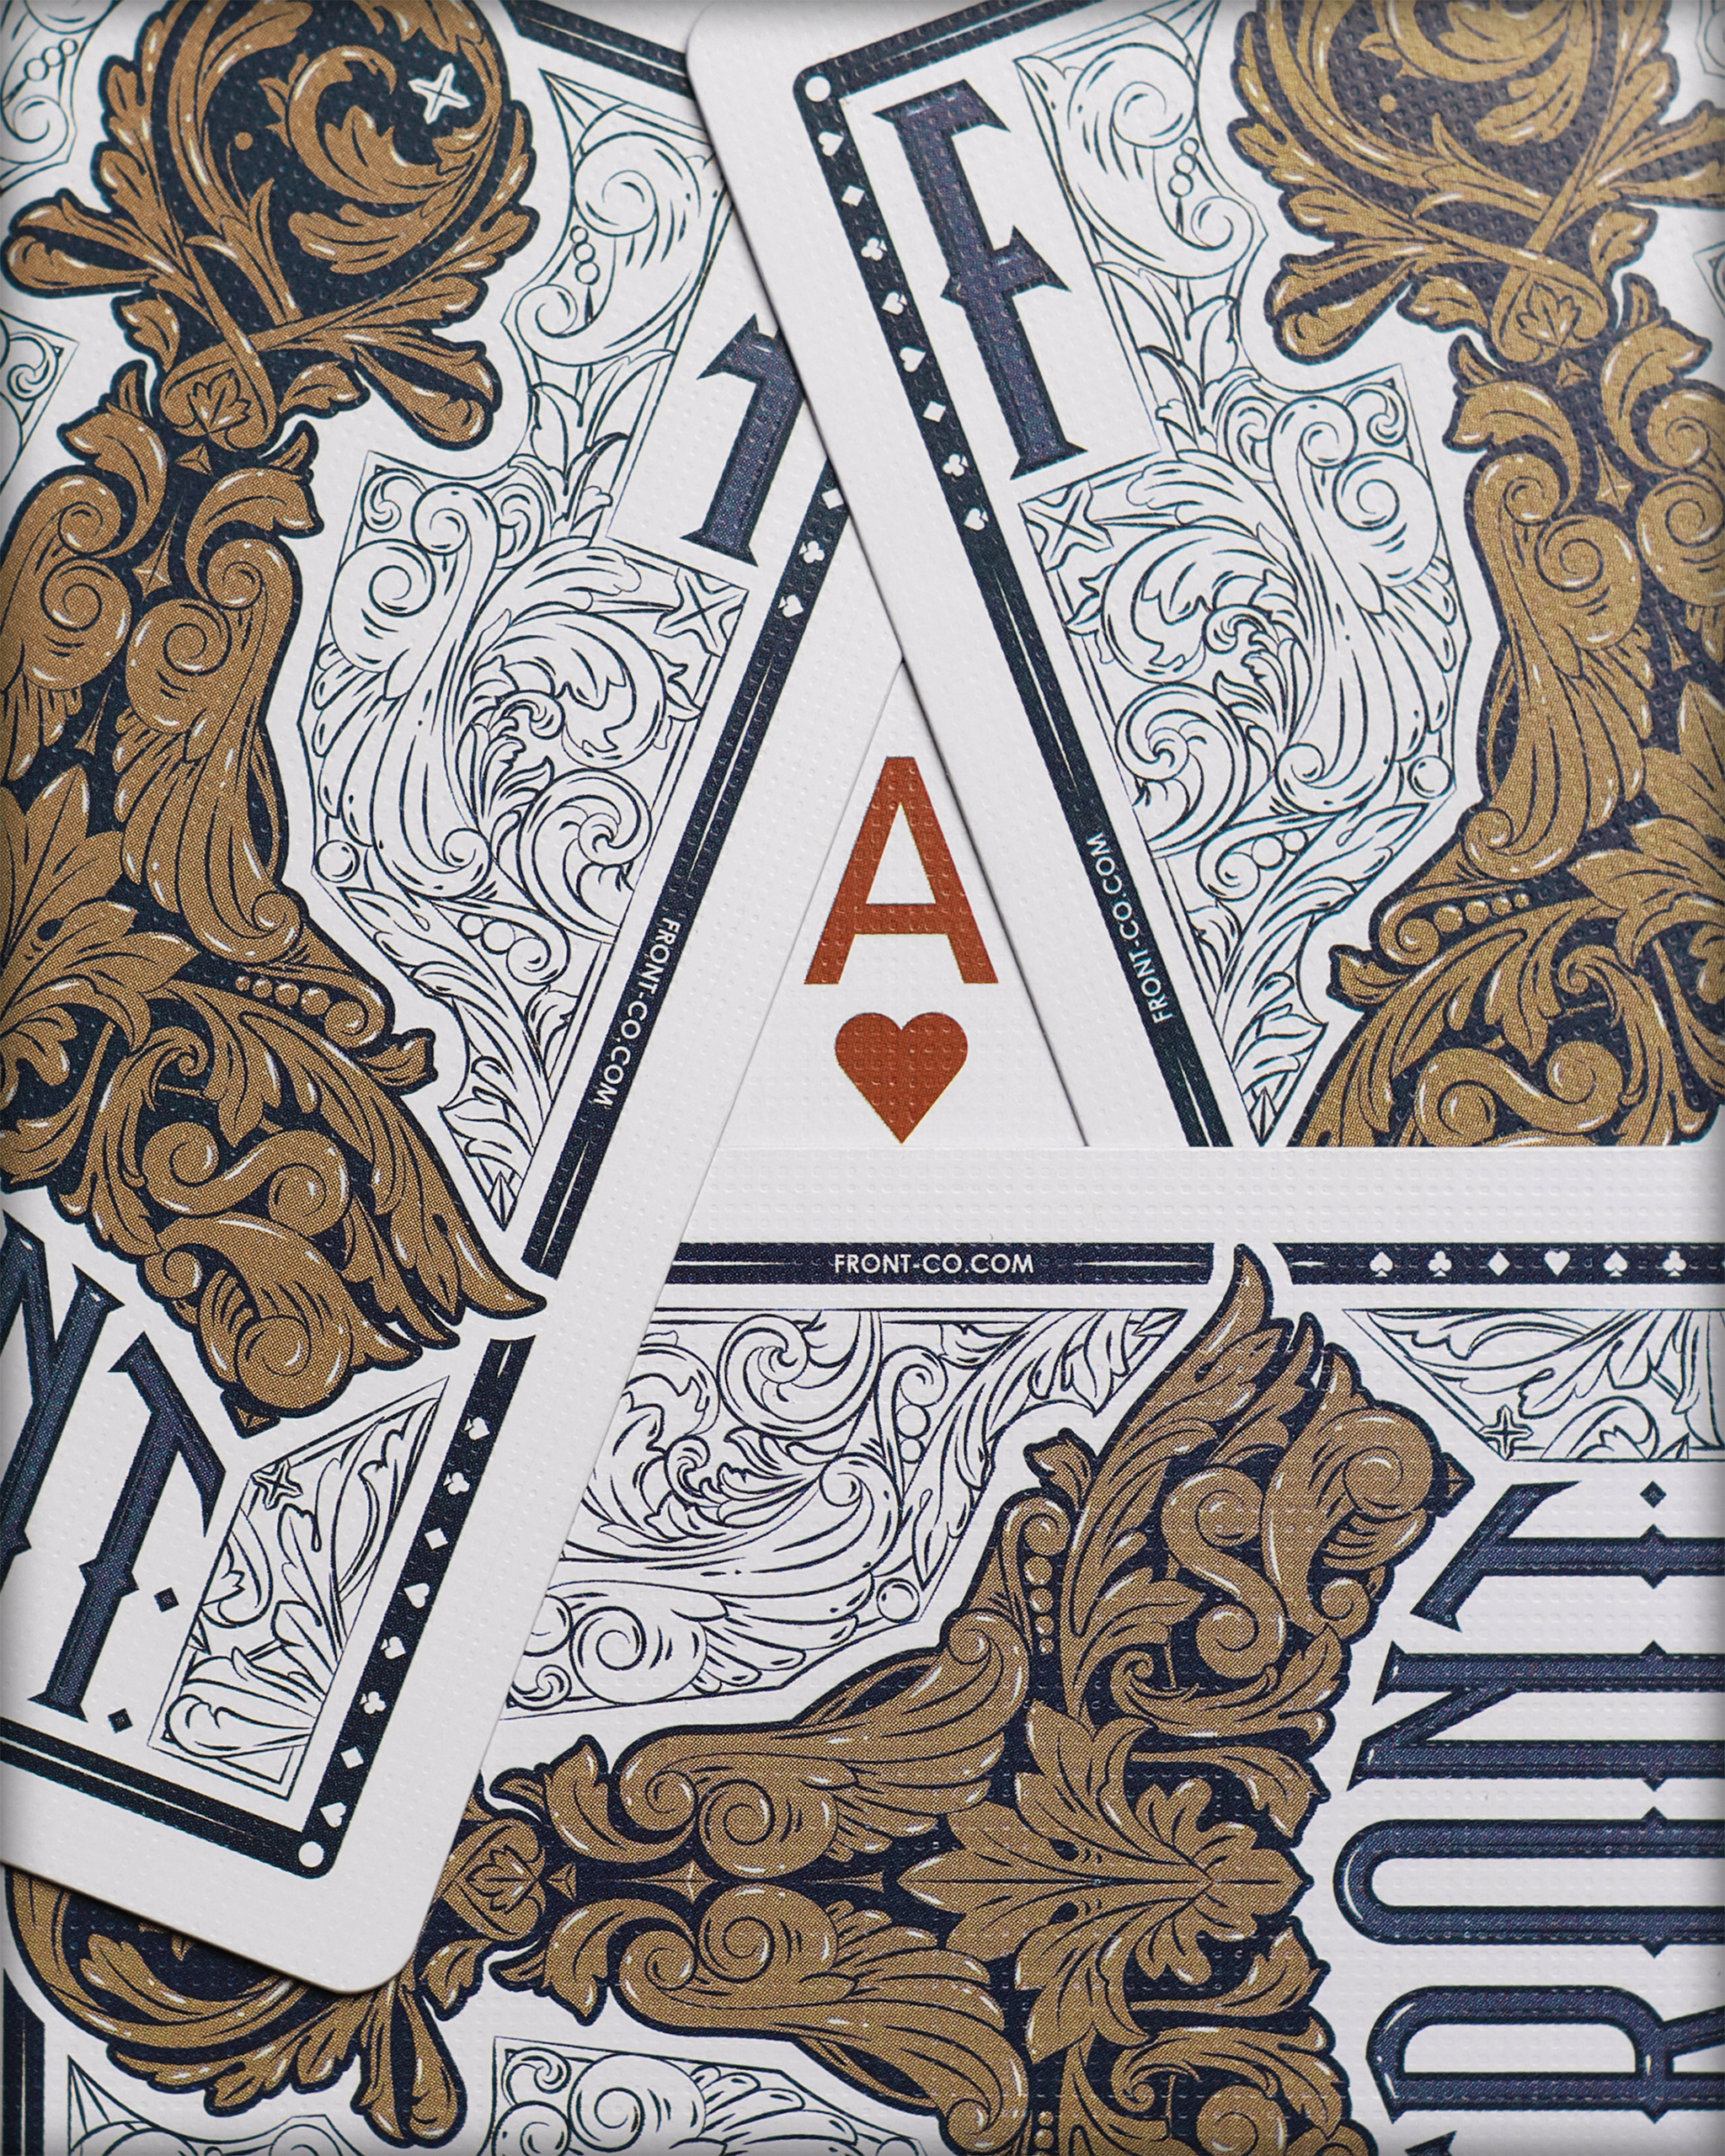 FRONT Baroque Playing Cards